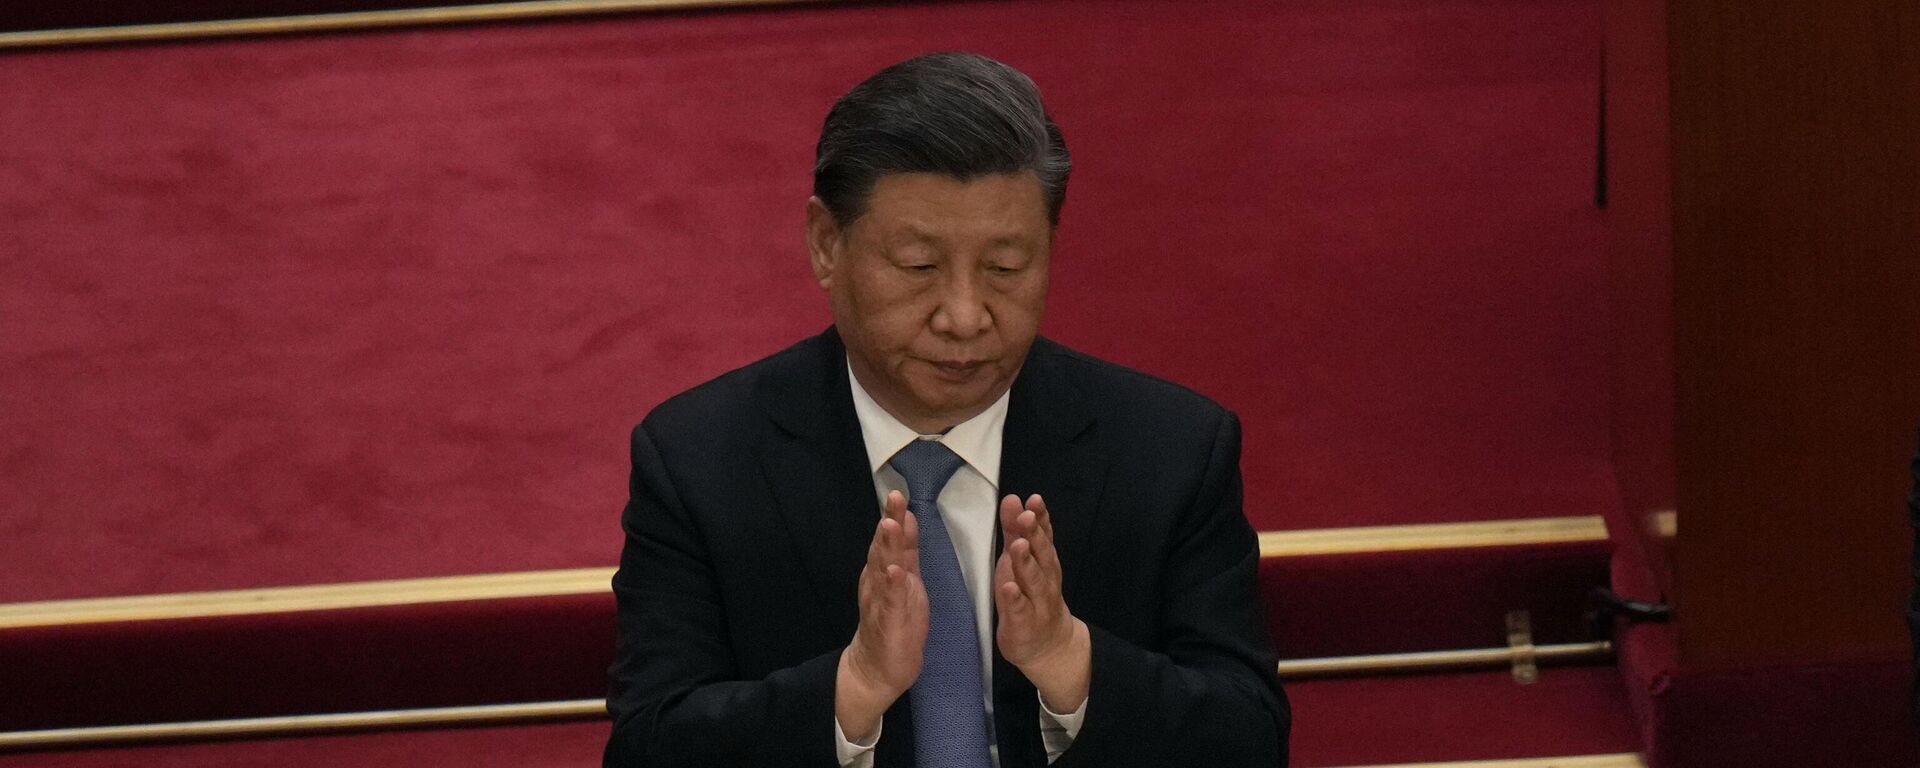 Chinese President Xi Jinping applauds during the opening session of the Chinese People's Political Consultative Congress (CPPCC) at the Great Hall of the People in Beijing, Saturday, March 4, 2023. (AP Photo/Andy Wong) - Sputnik International, 1920, 19.06.2023